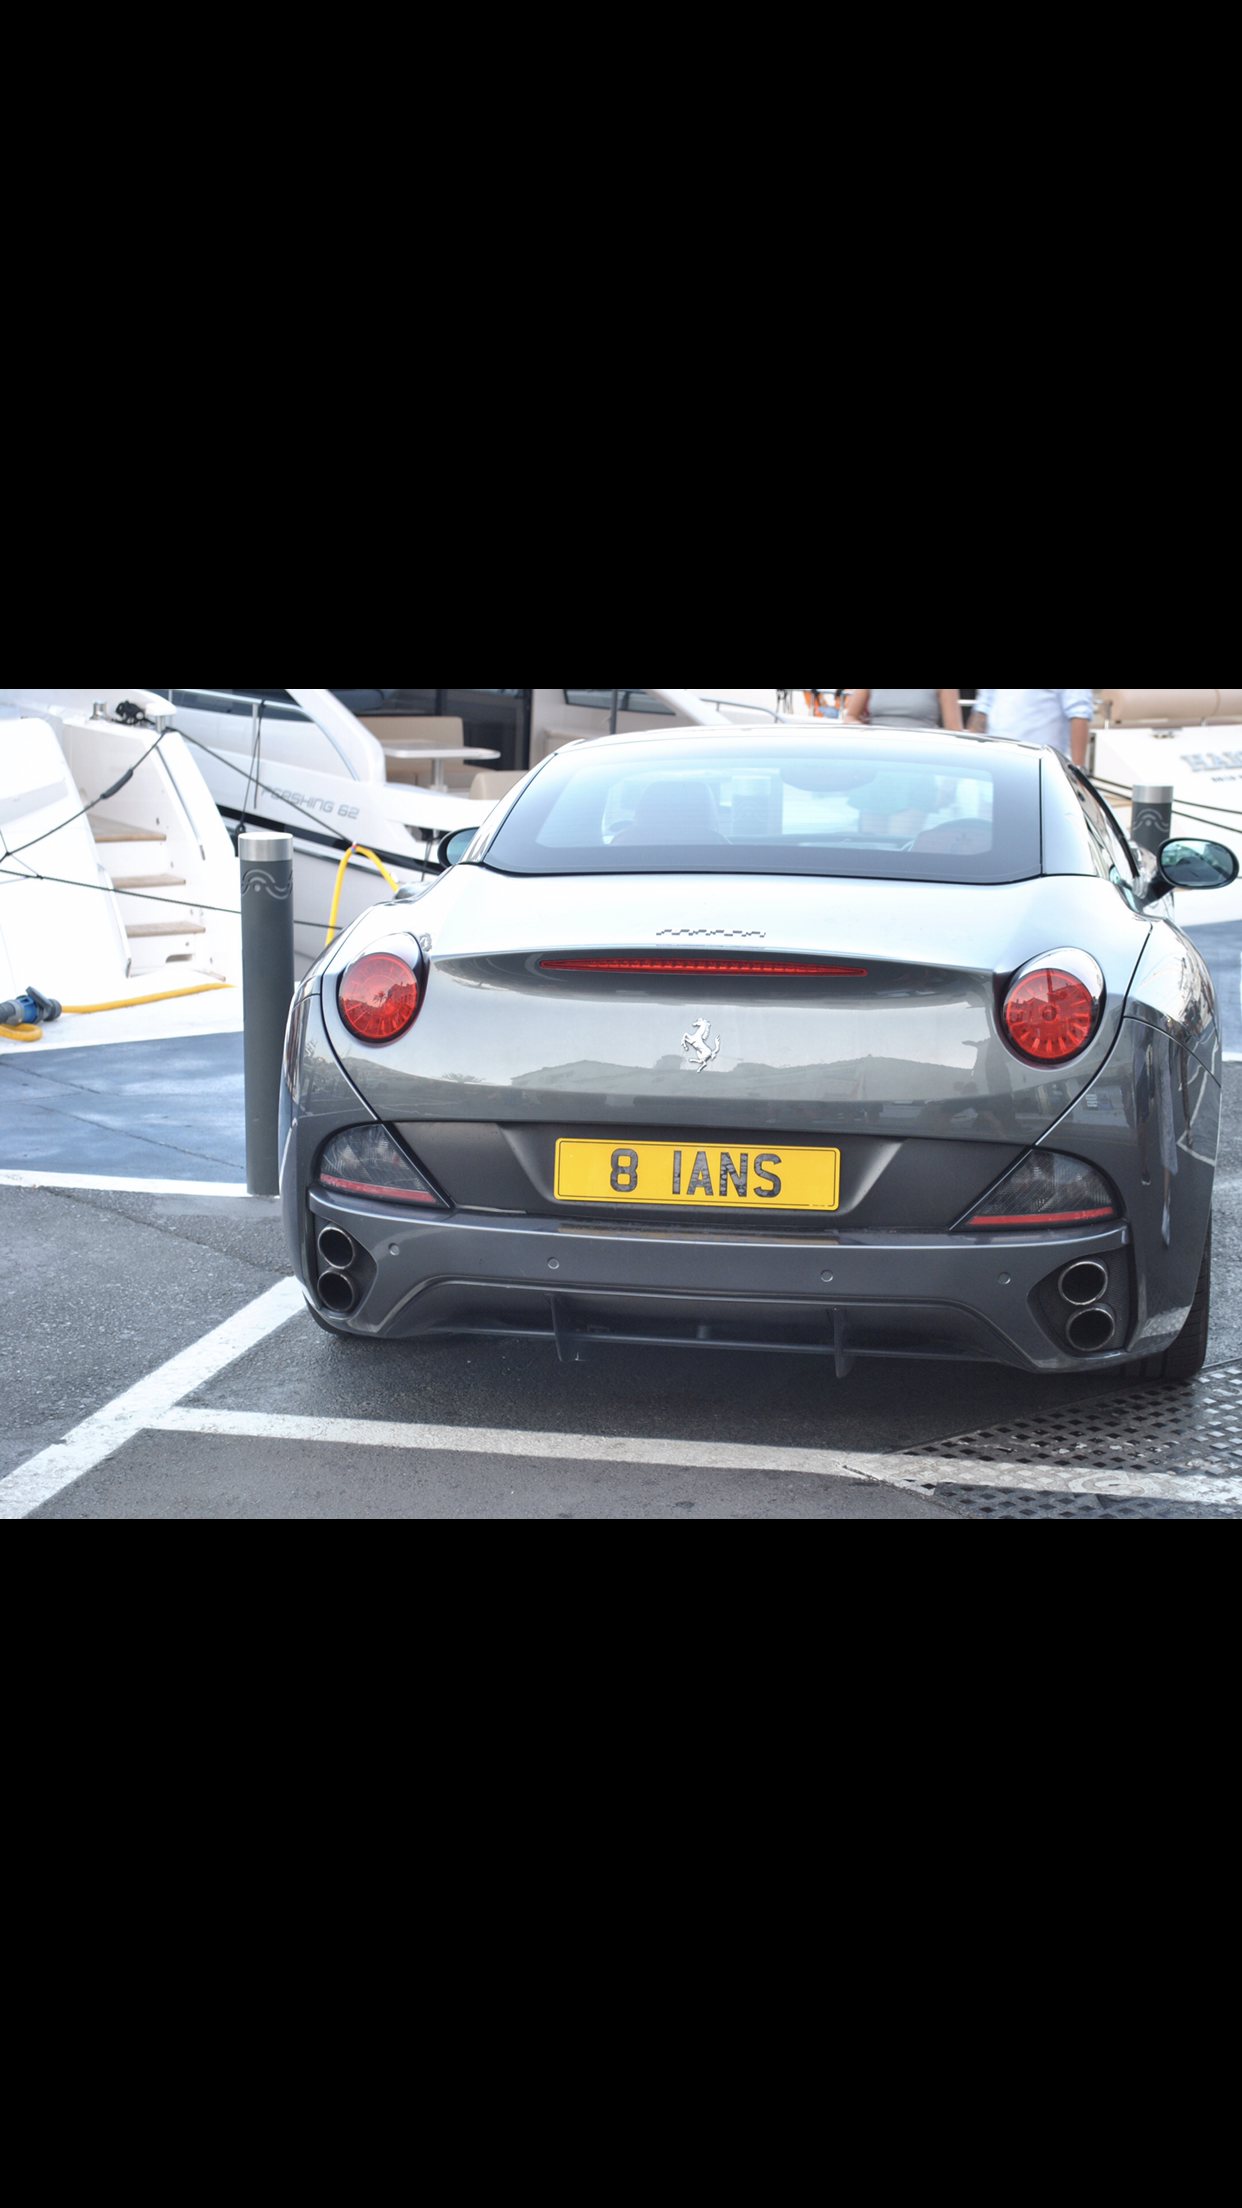 Real Good Number Plates Vol. 6 - Page 8 - General Gassing - PistonHeads